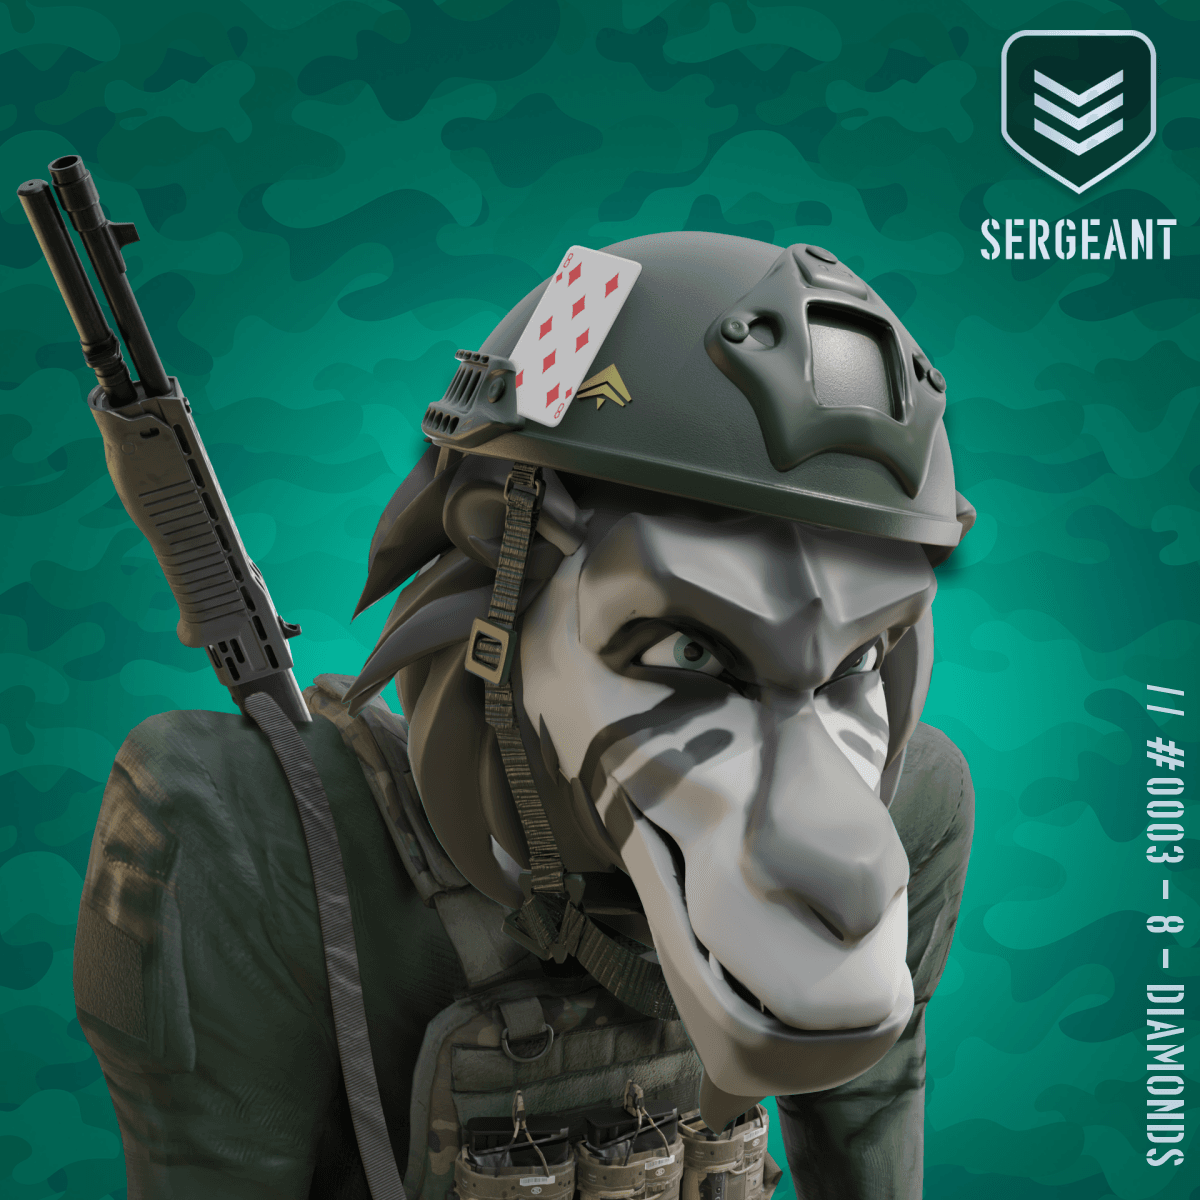 Angry Black Sergeant Baboon #3